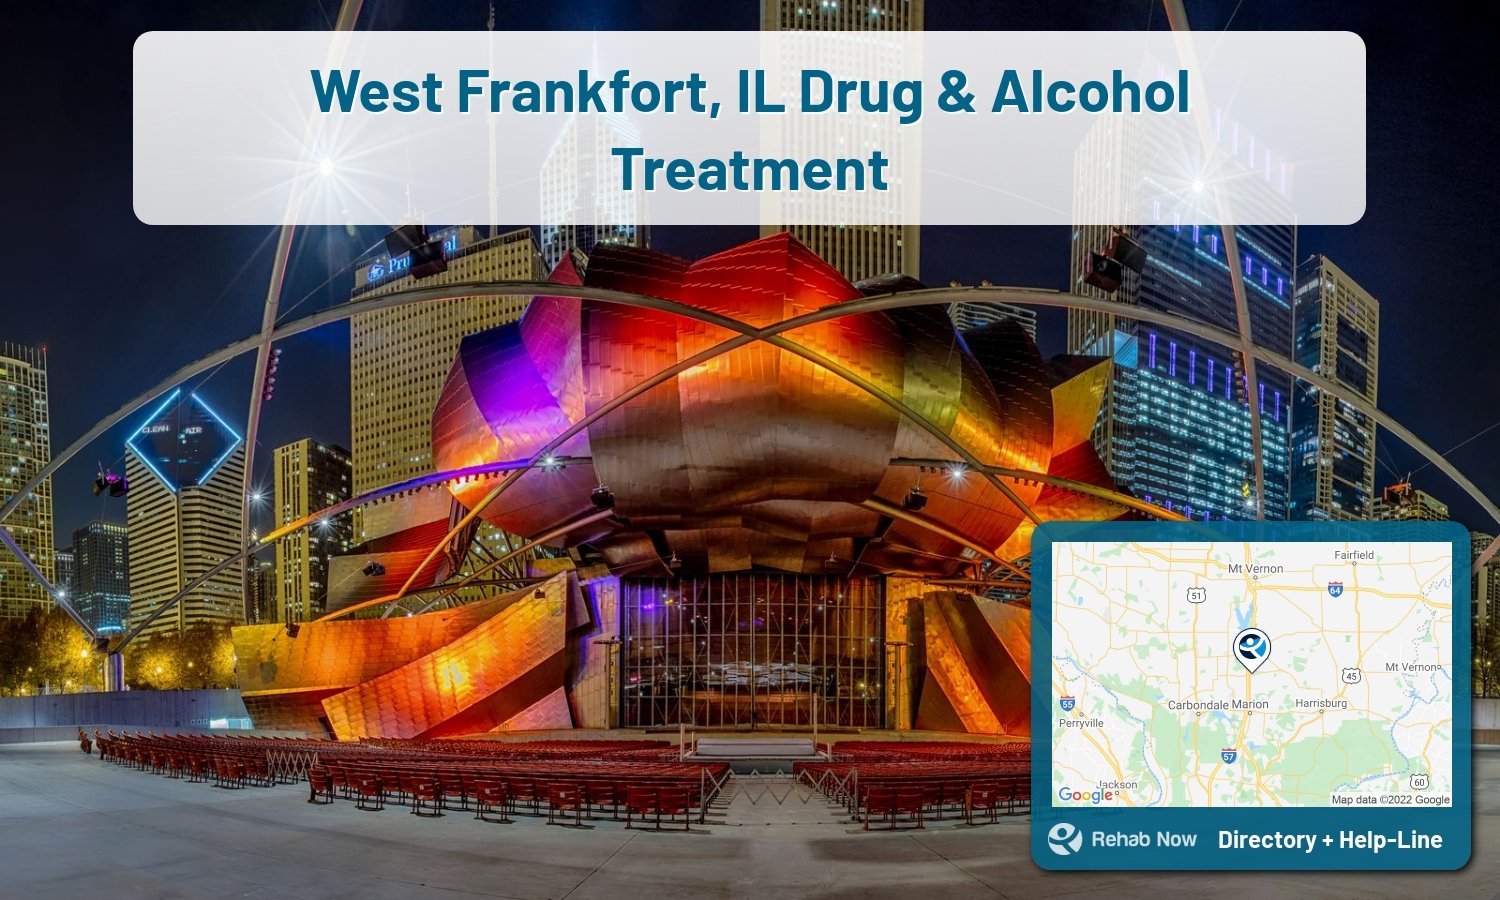 List of alcohol and drug treatment centers near you in West Frankfort, Illinois. Research certifications, programs, methods, pricing, and more.